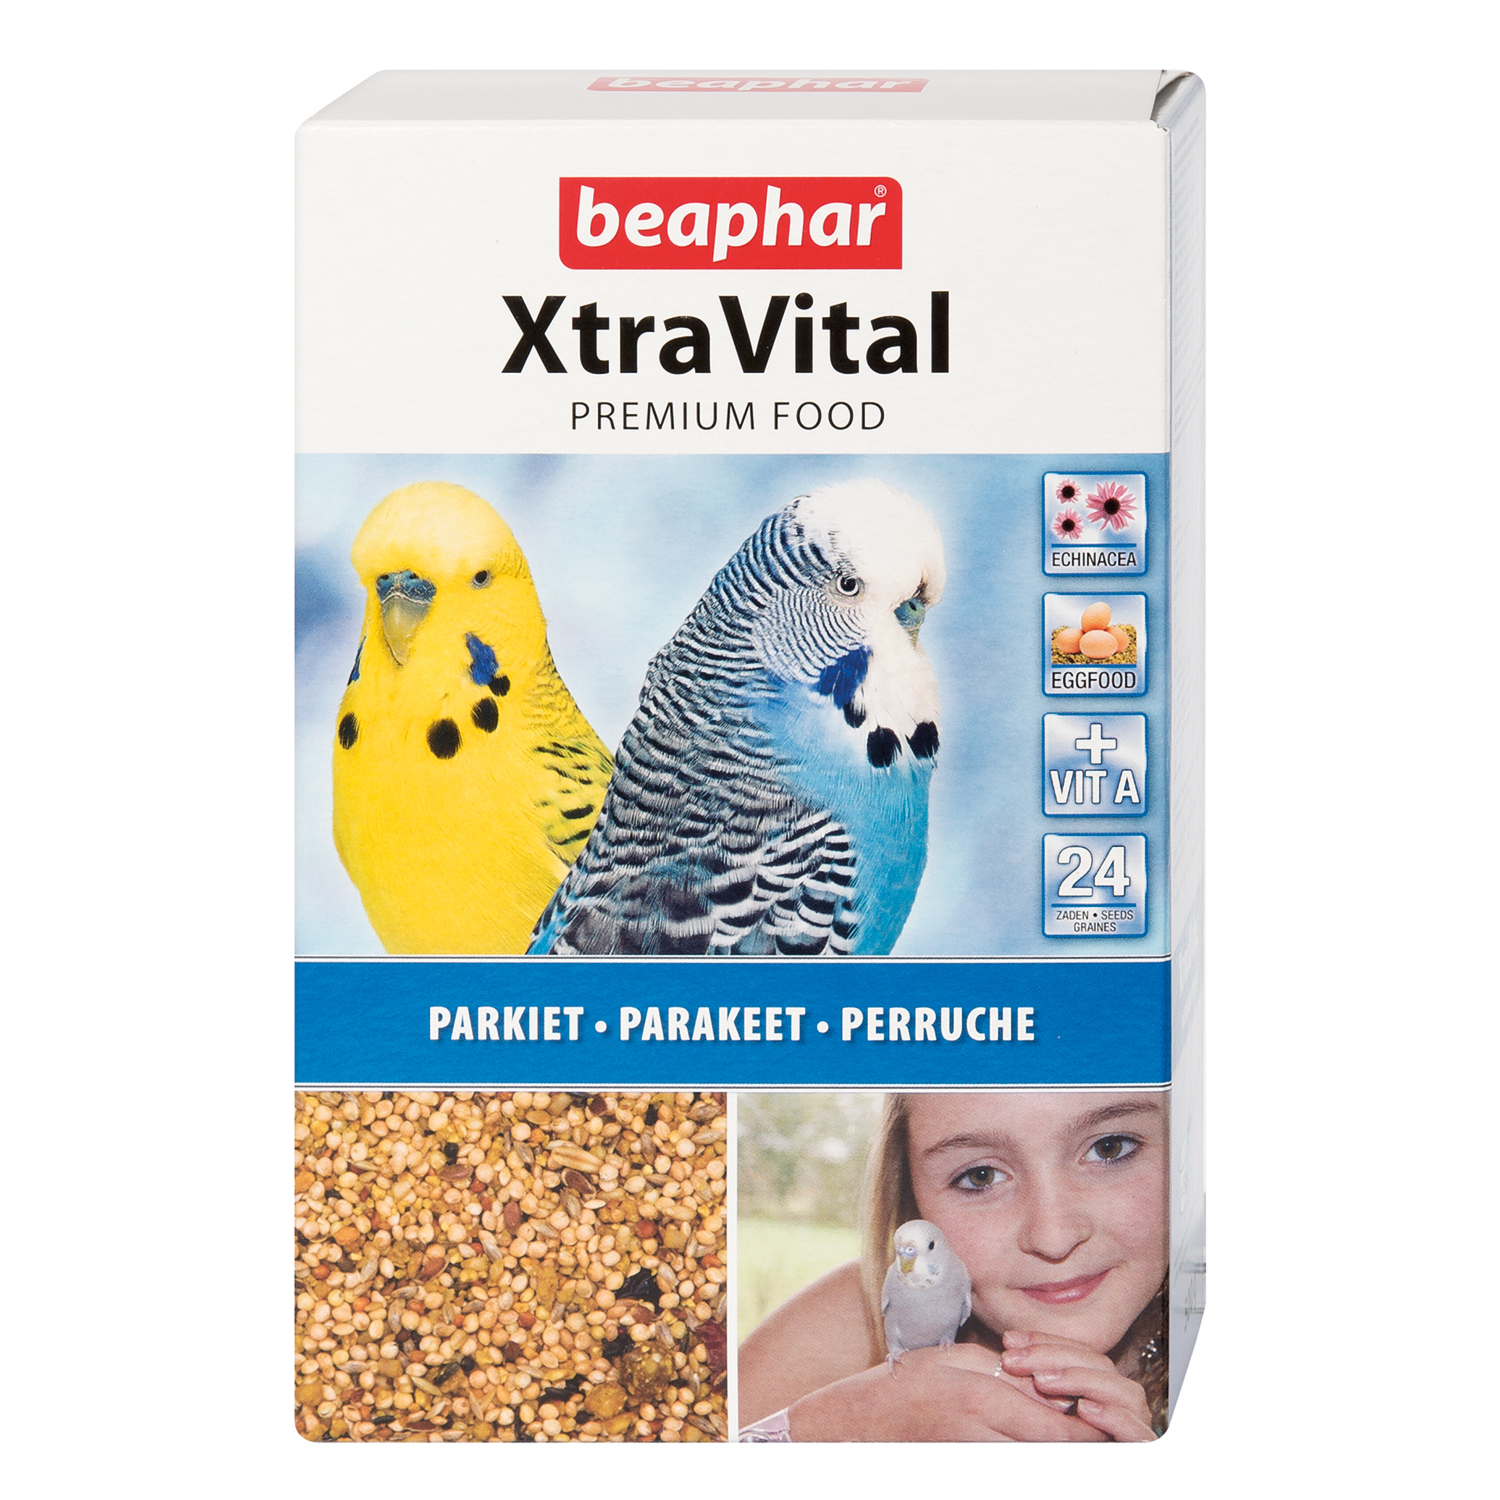 Beaphar XtraVital Premium Foor for Parakeets and Budgies Image